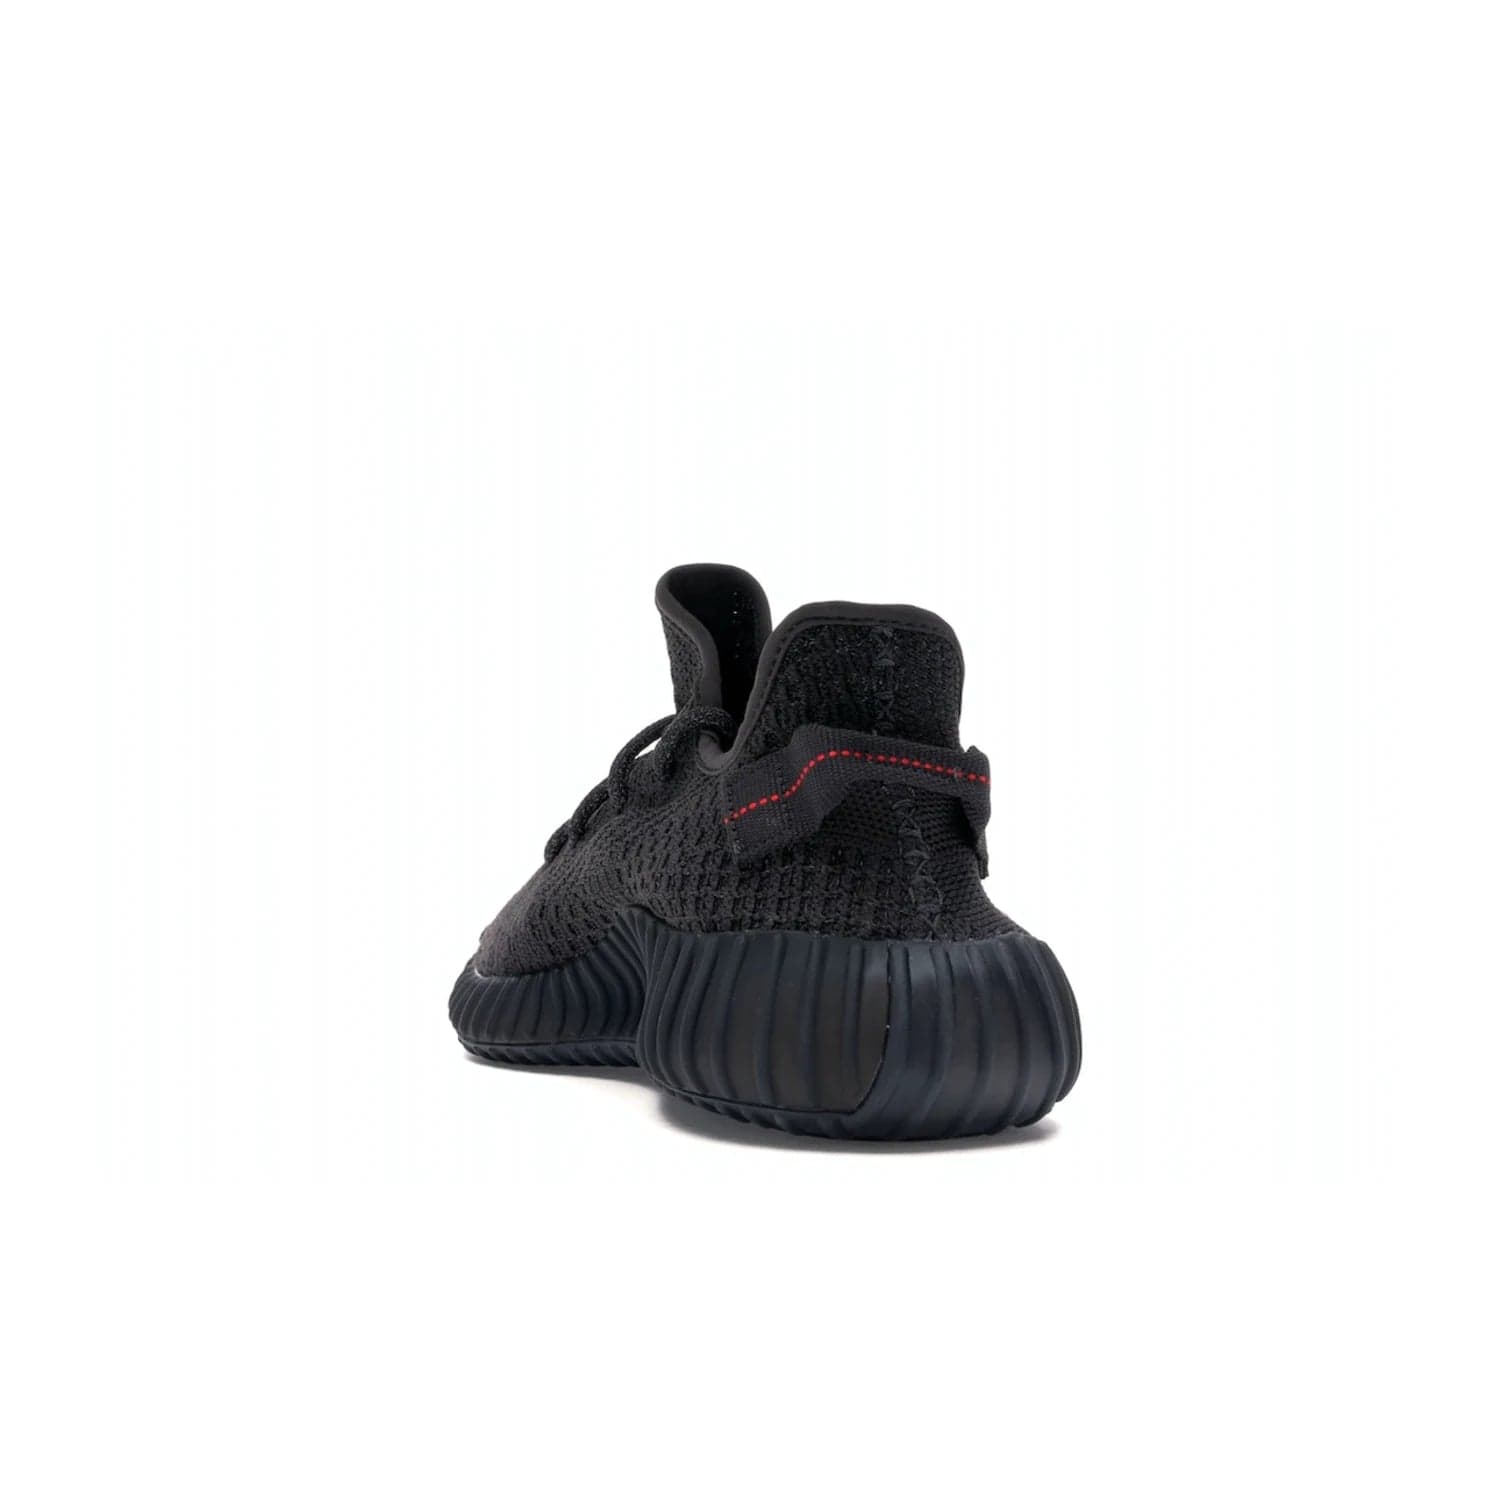 adidas Yeezy Boost 350 V2 Static Black (Reflective) - Image 26 - Only at www.BallersClubKickz.com - Make a statement with the adidas Yeezy Boost 350 V2 Static Black Reflective. All-black upper, reflective accents, midsole, and sole combine for a stylish look. High quality materials. June 2019 release. Add to your collection today.